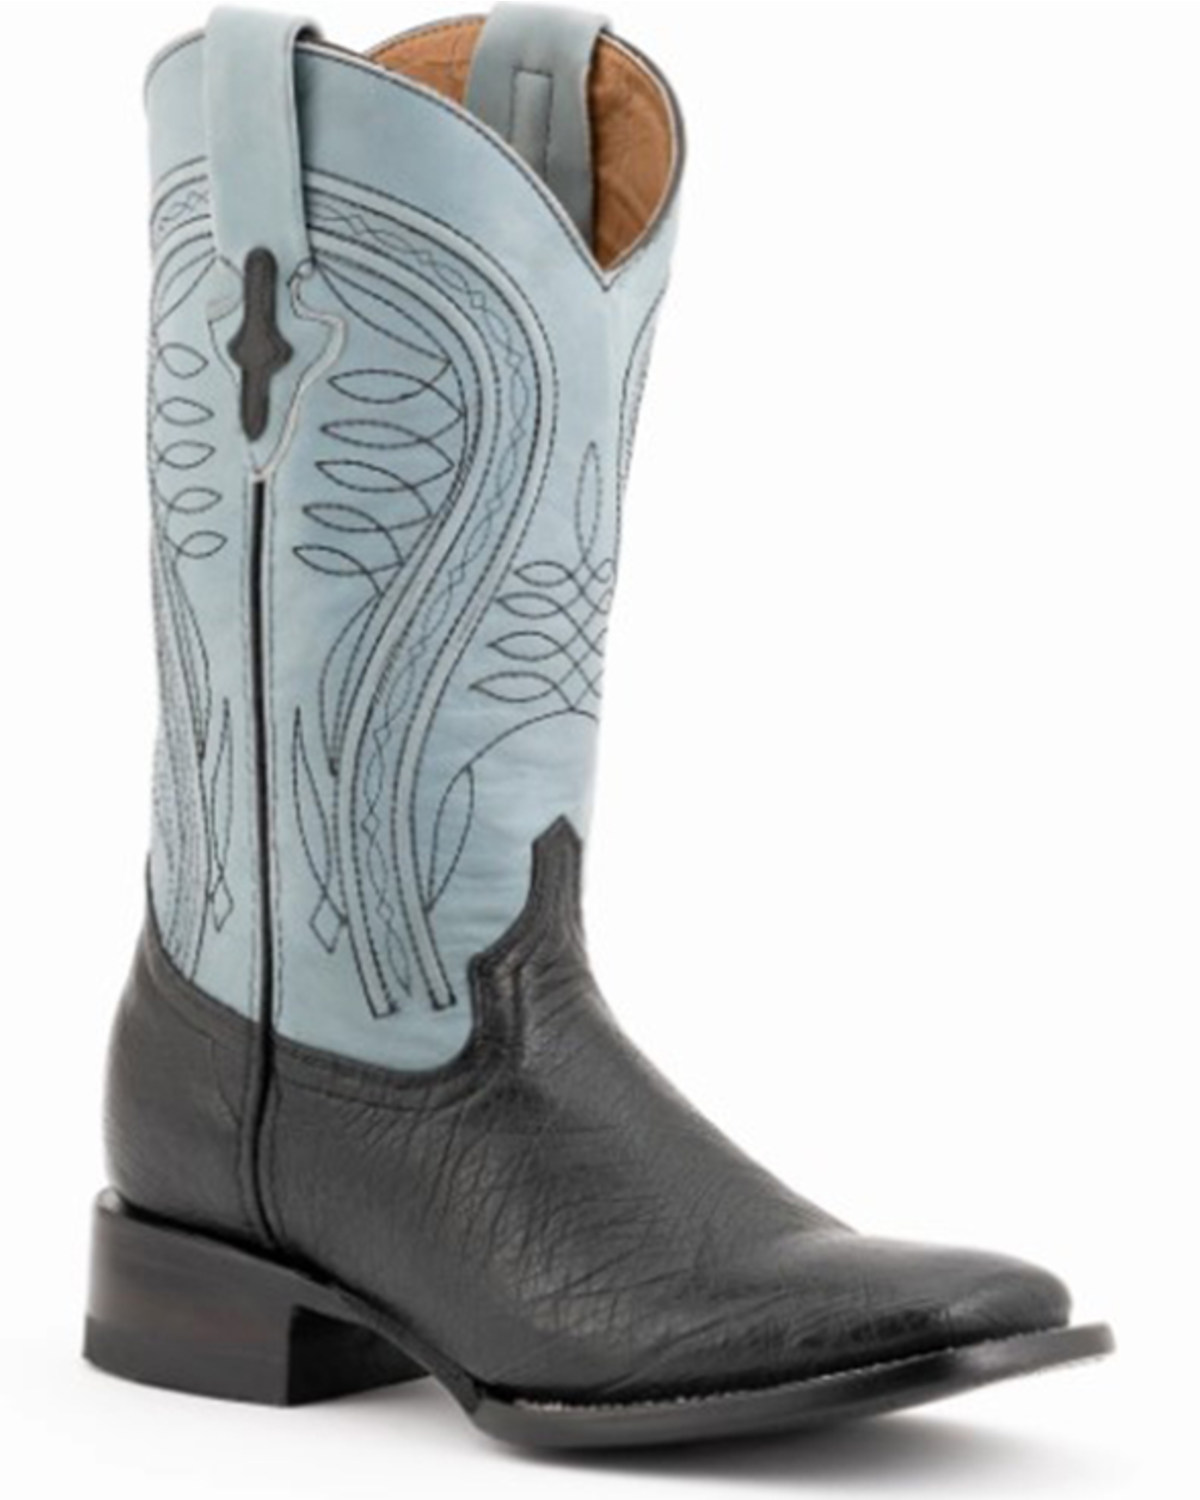 Ferrini Men's Smooth Quill Ostrich Exotic Boots - Broad Square Toe